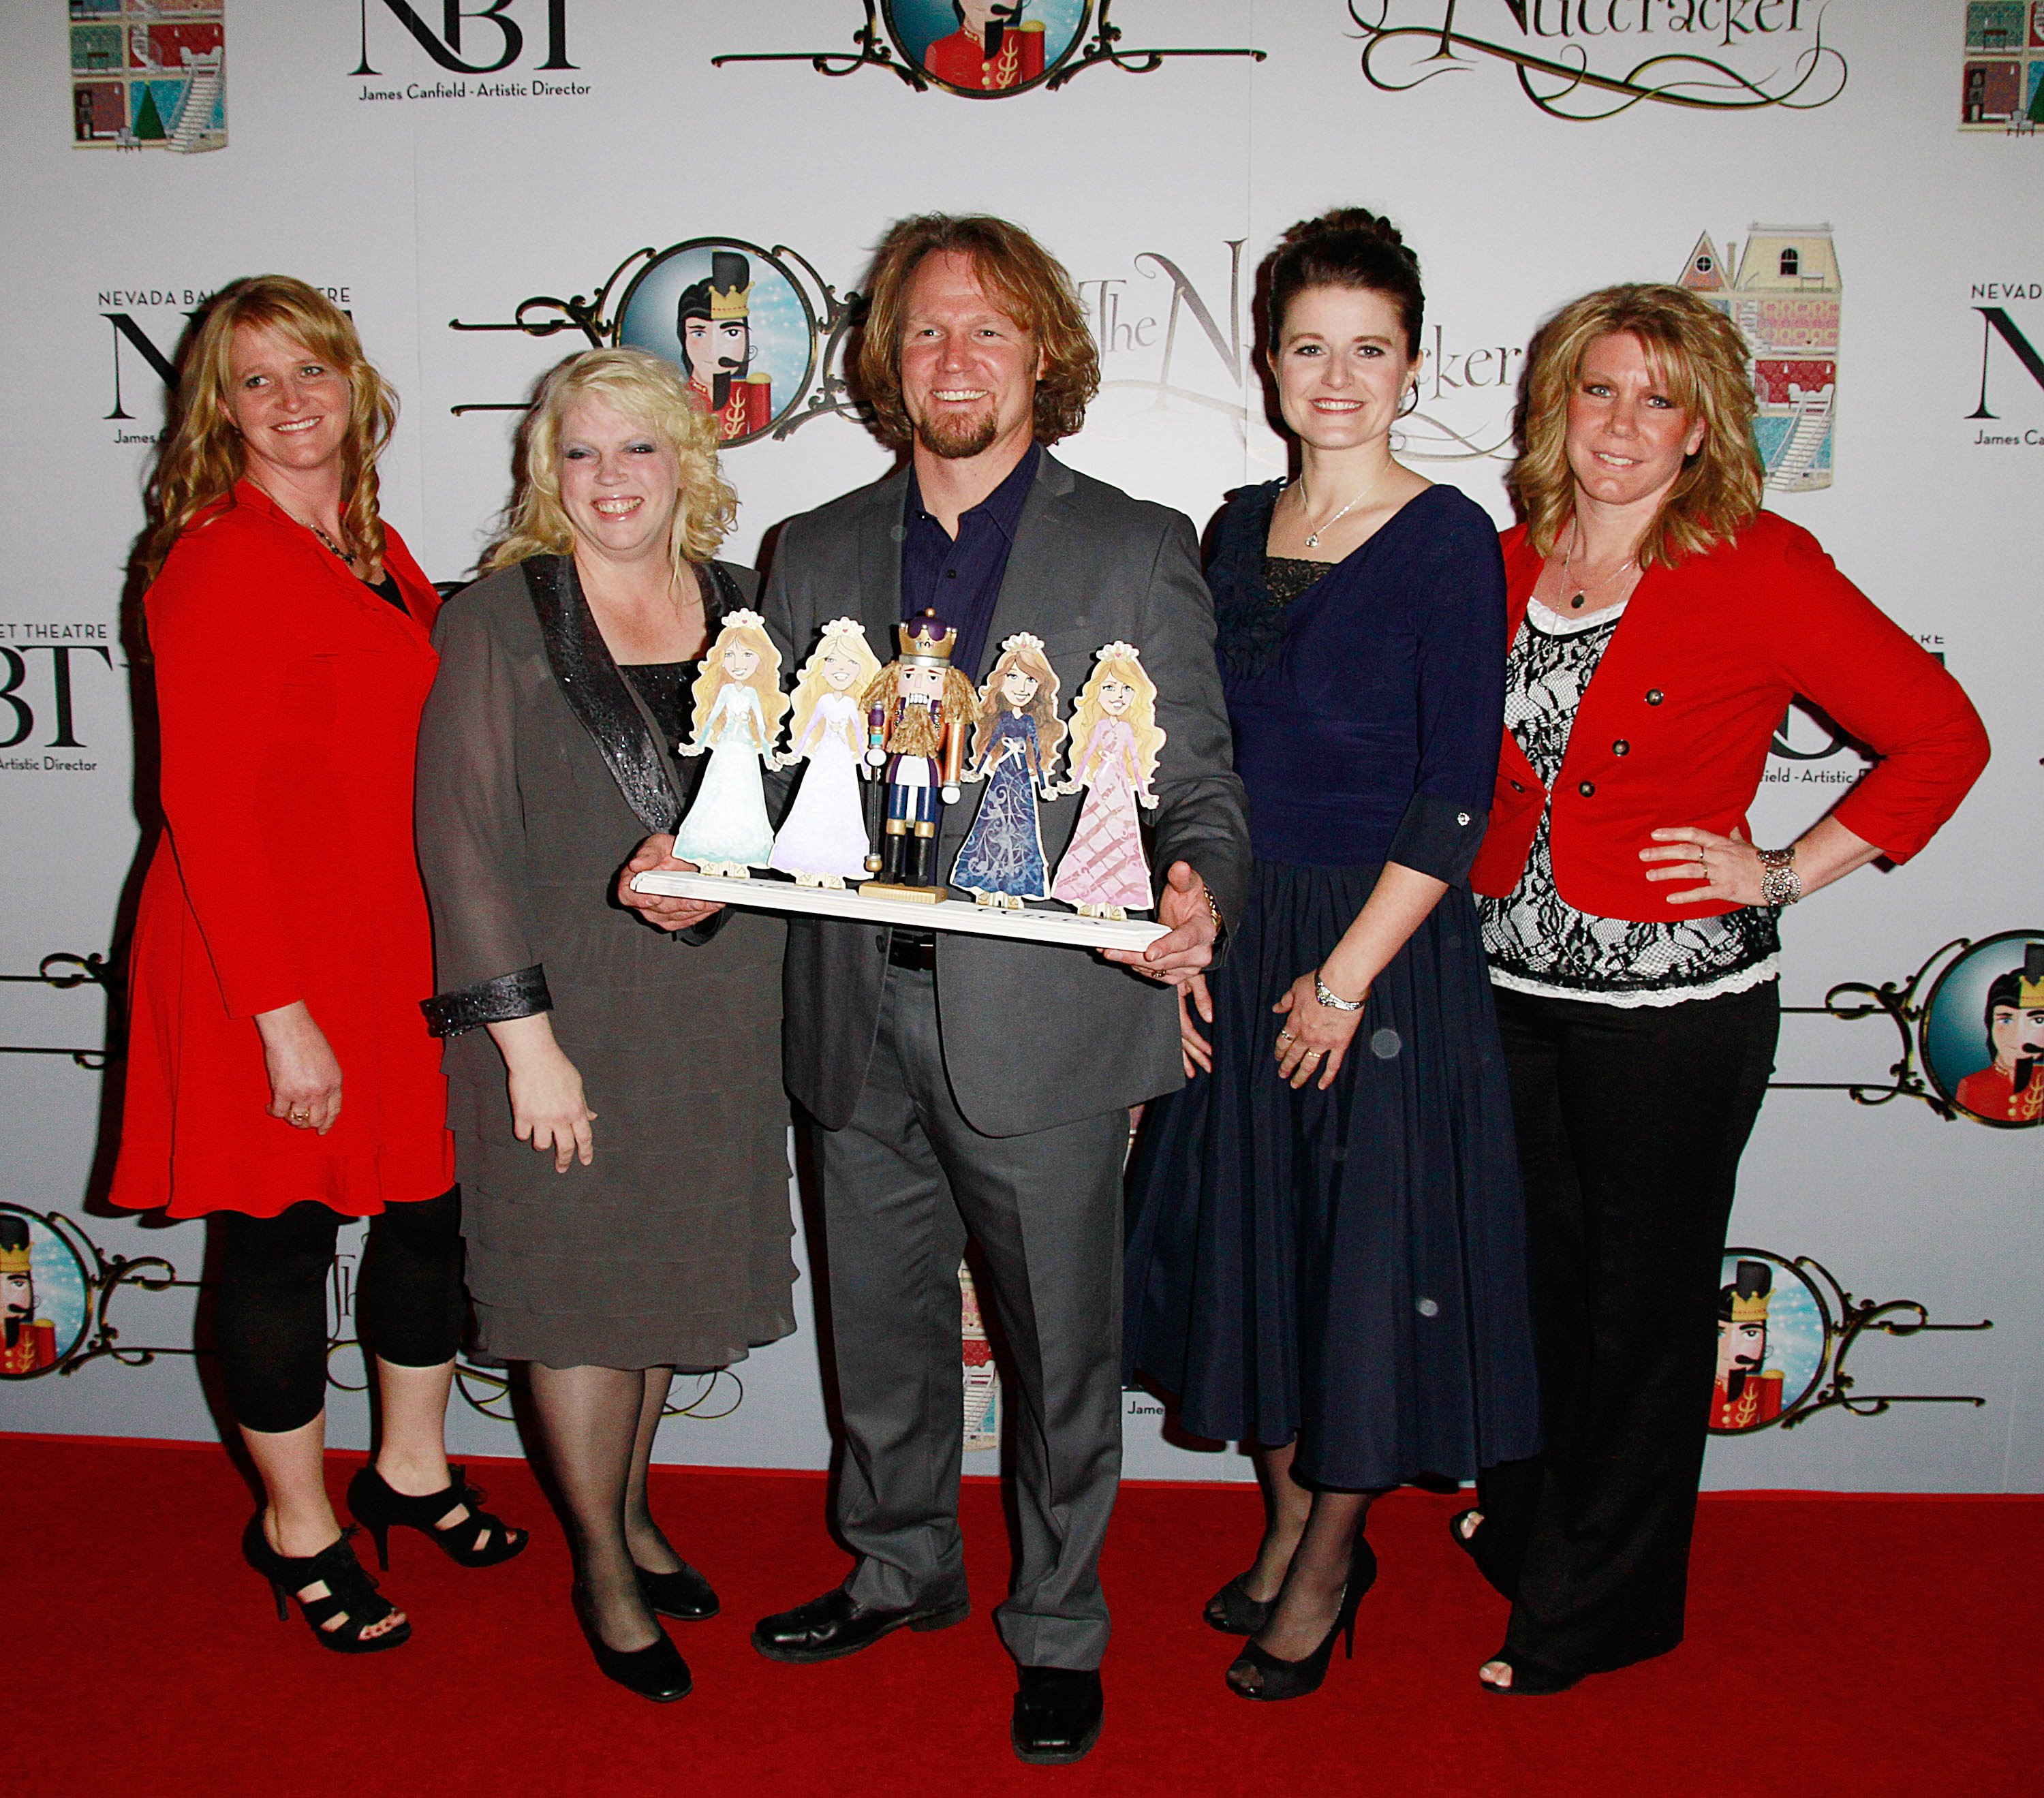 'Sister Wives' stars, Christine Brown, Janelle Brown, Kody Brown, Robyn Brown and Meri Brown pose for a photo at the opening of 'The Nutcracker' in Las Vegas